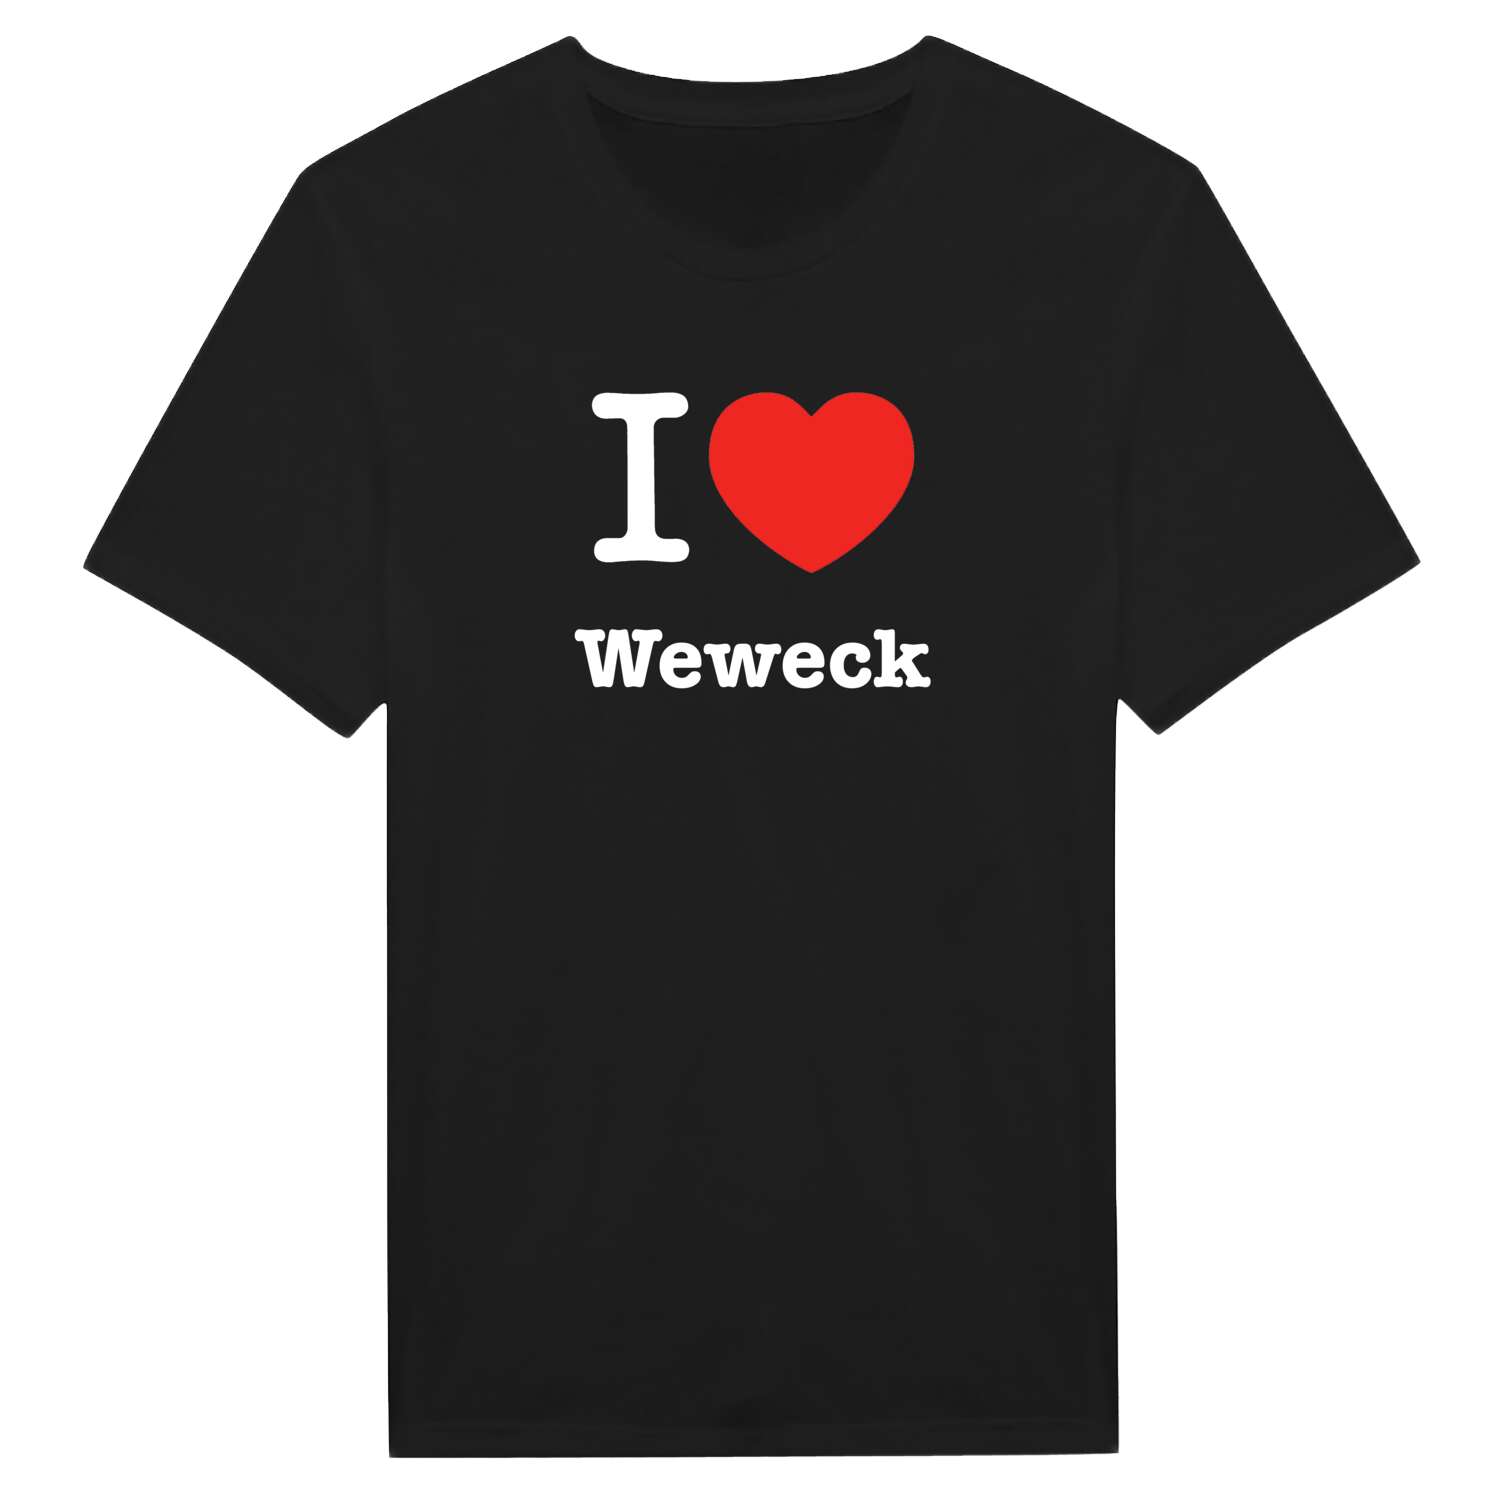 Weweck T-Shirt »I love«